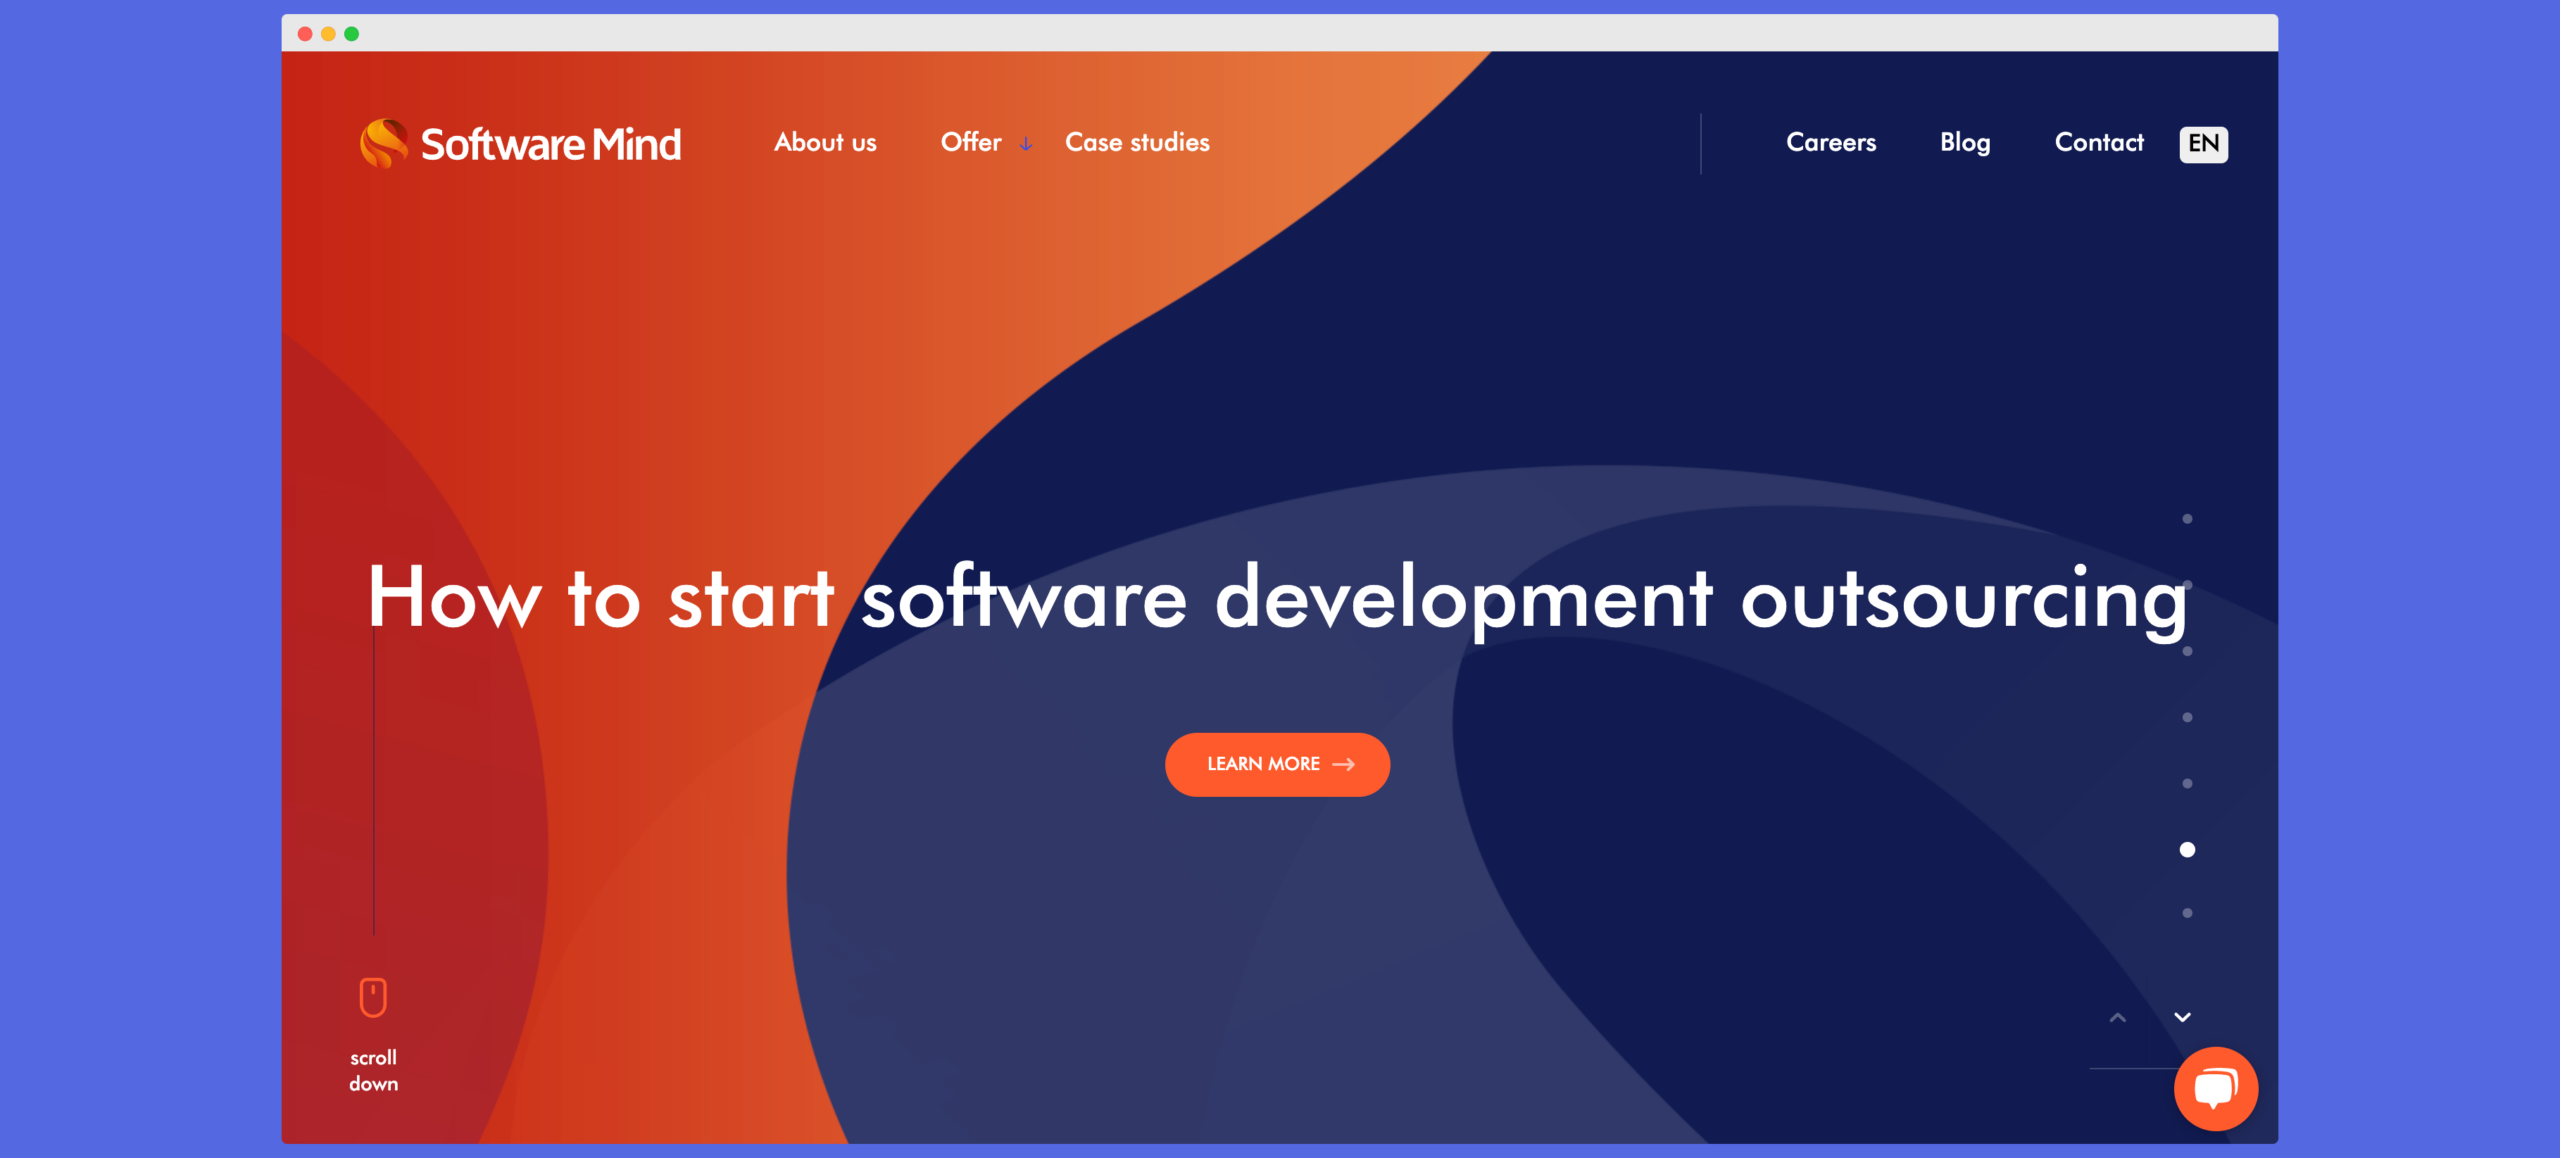 software mind - mobile app development outsourcing company